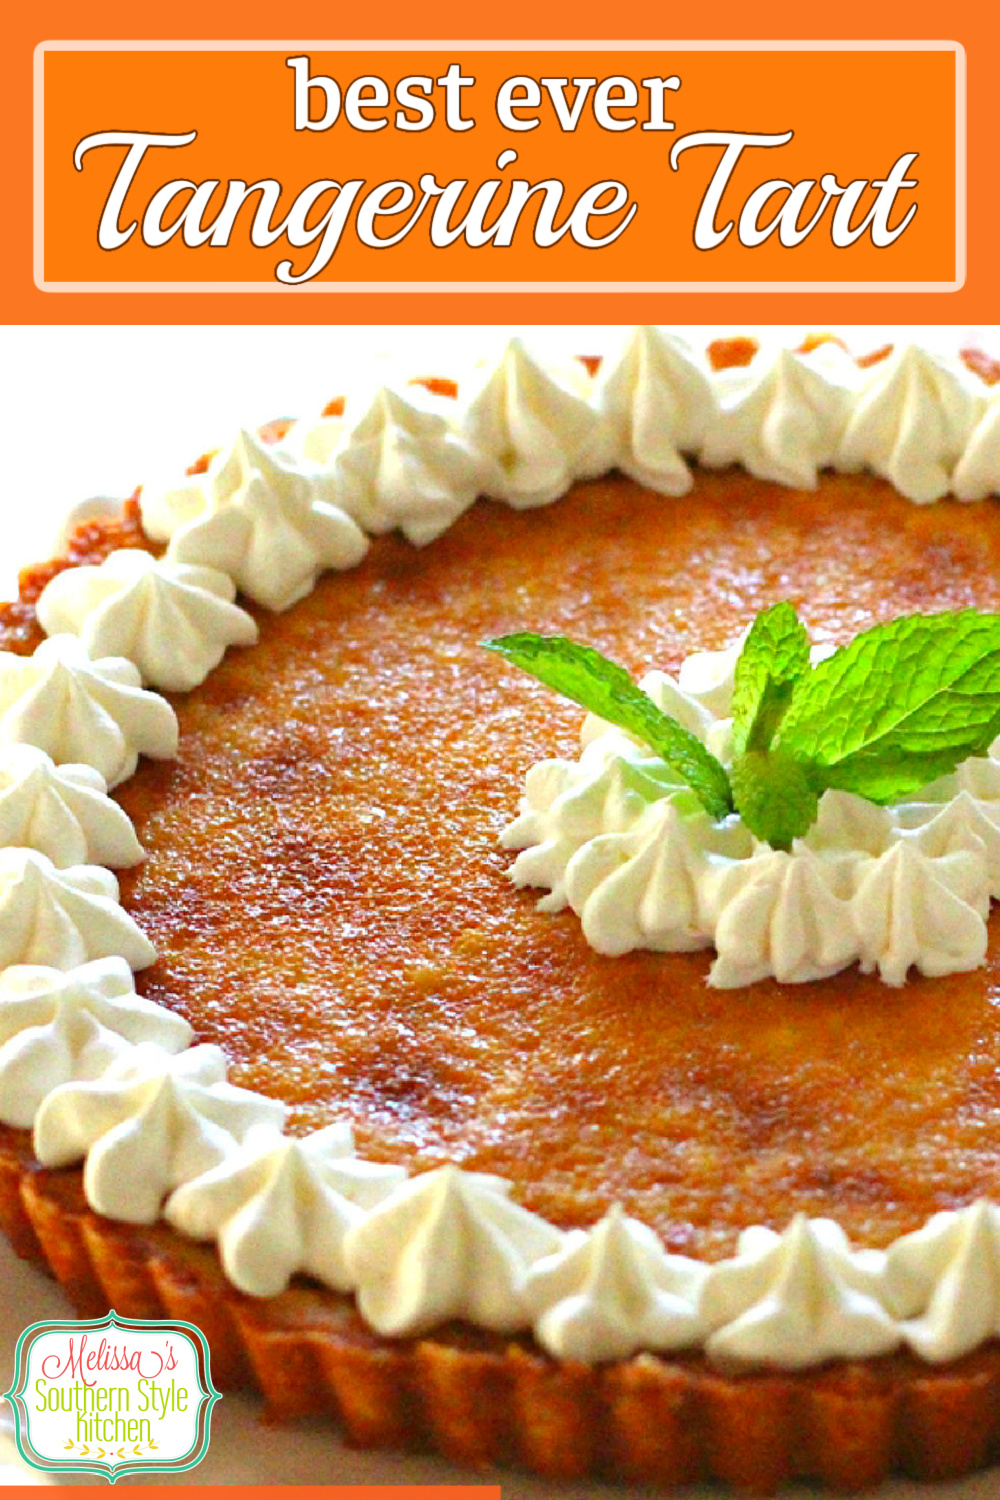 If you love the flavor of creamsicle you'll flip for this Tangerine Tart #tangerines #tangerinetart #creamsicle #dreamsicledesserts #orange #pierecipes #desserts #dessertfoodrecipes #southernfood #holidays #holidayrecipes #bbqdesserts #melissassouthernstylekitchen